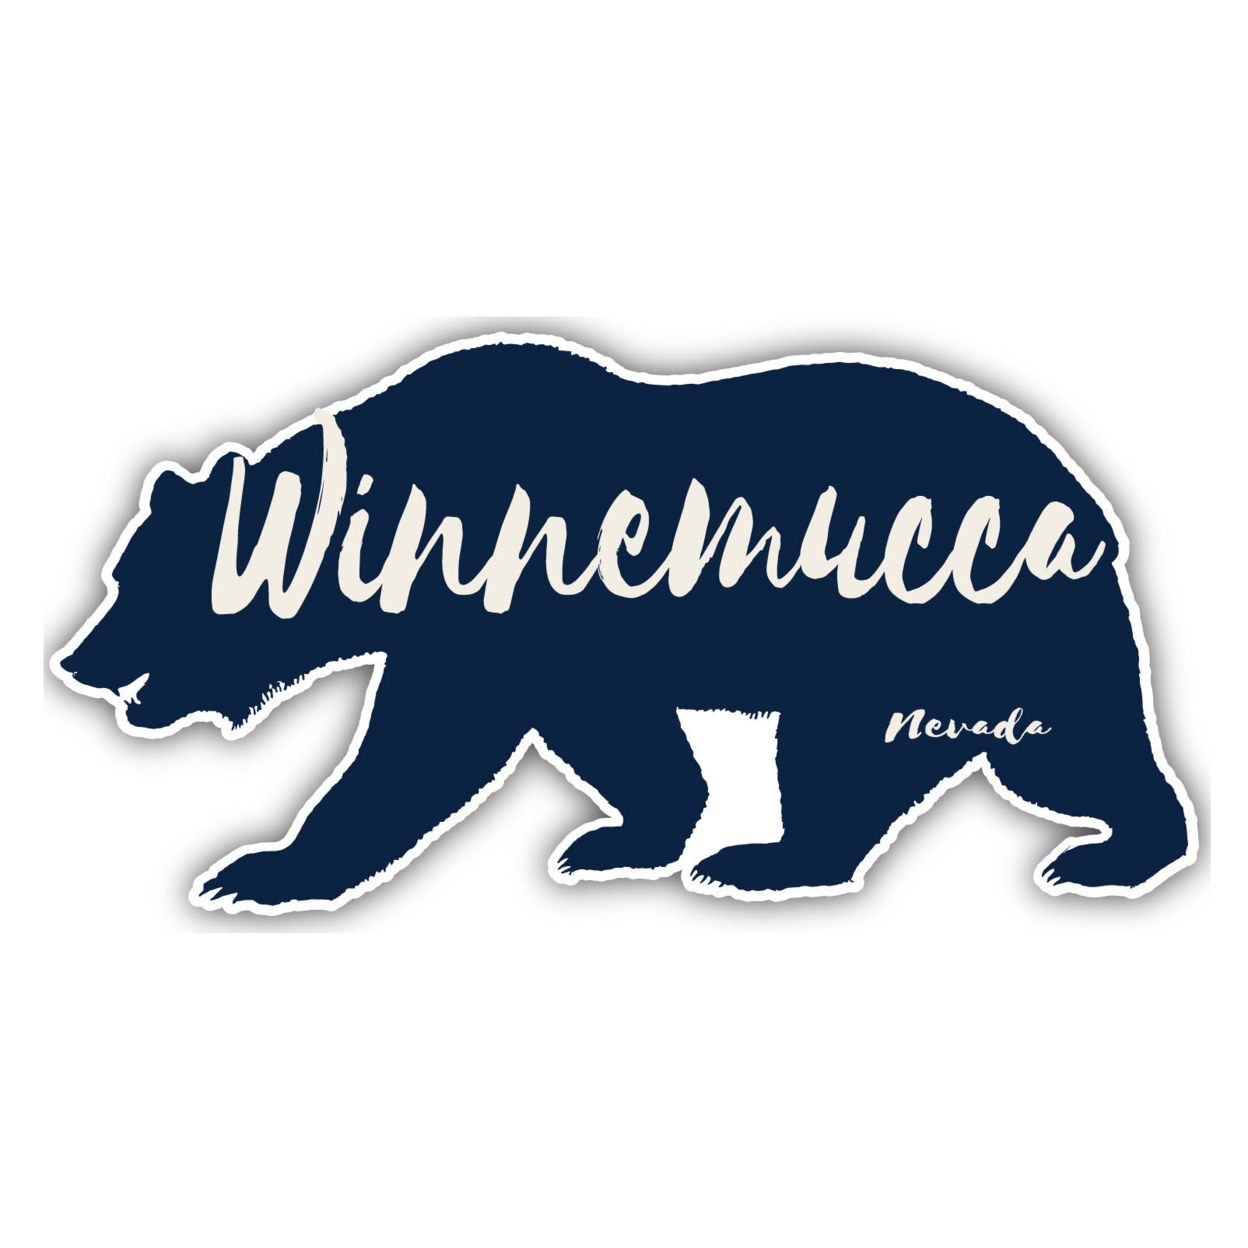 Winnemucca Nevada Souvenir Decorative Stickers (Choose Theme And Size) - Single Unit, 4-Inch, Great Outdoors